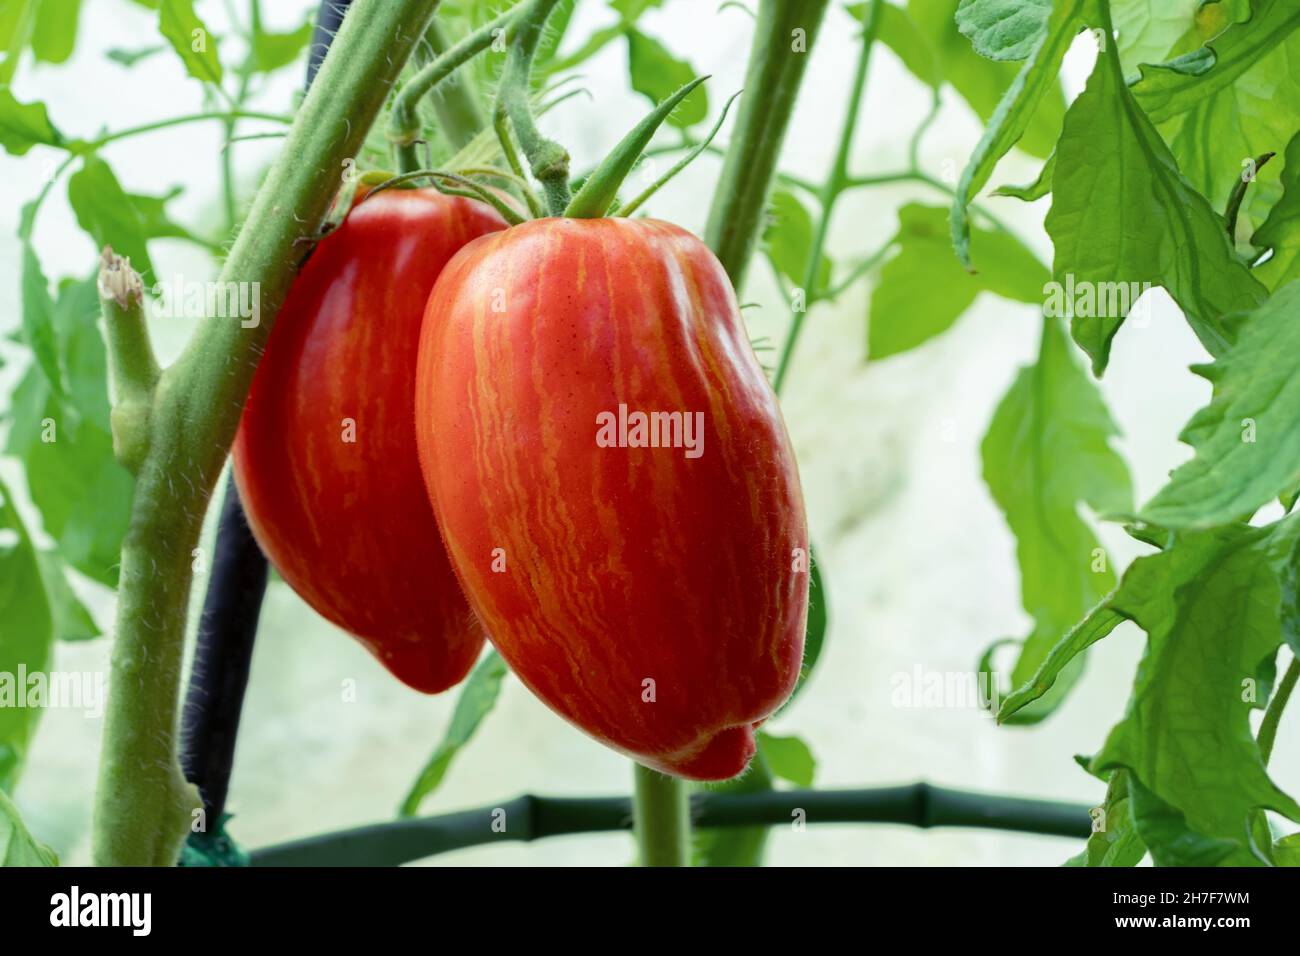 Ripe elongated striped tomatoes on a bush in a greenhouse Stock Photo